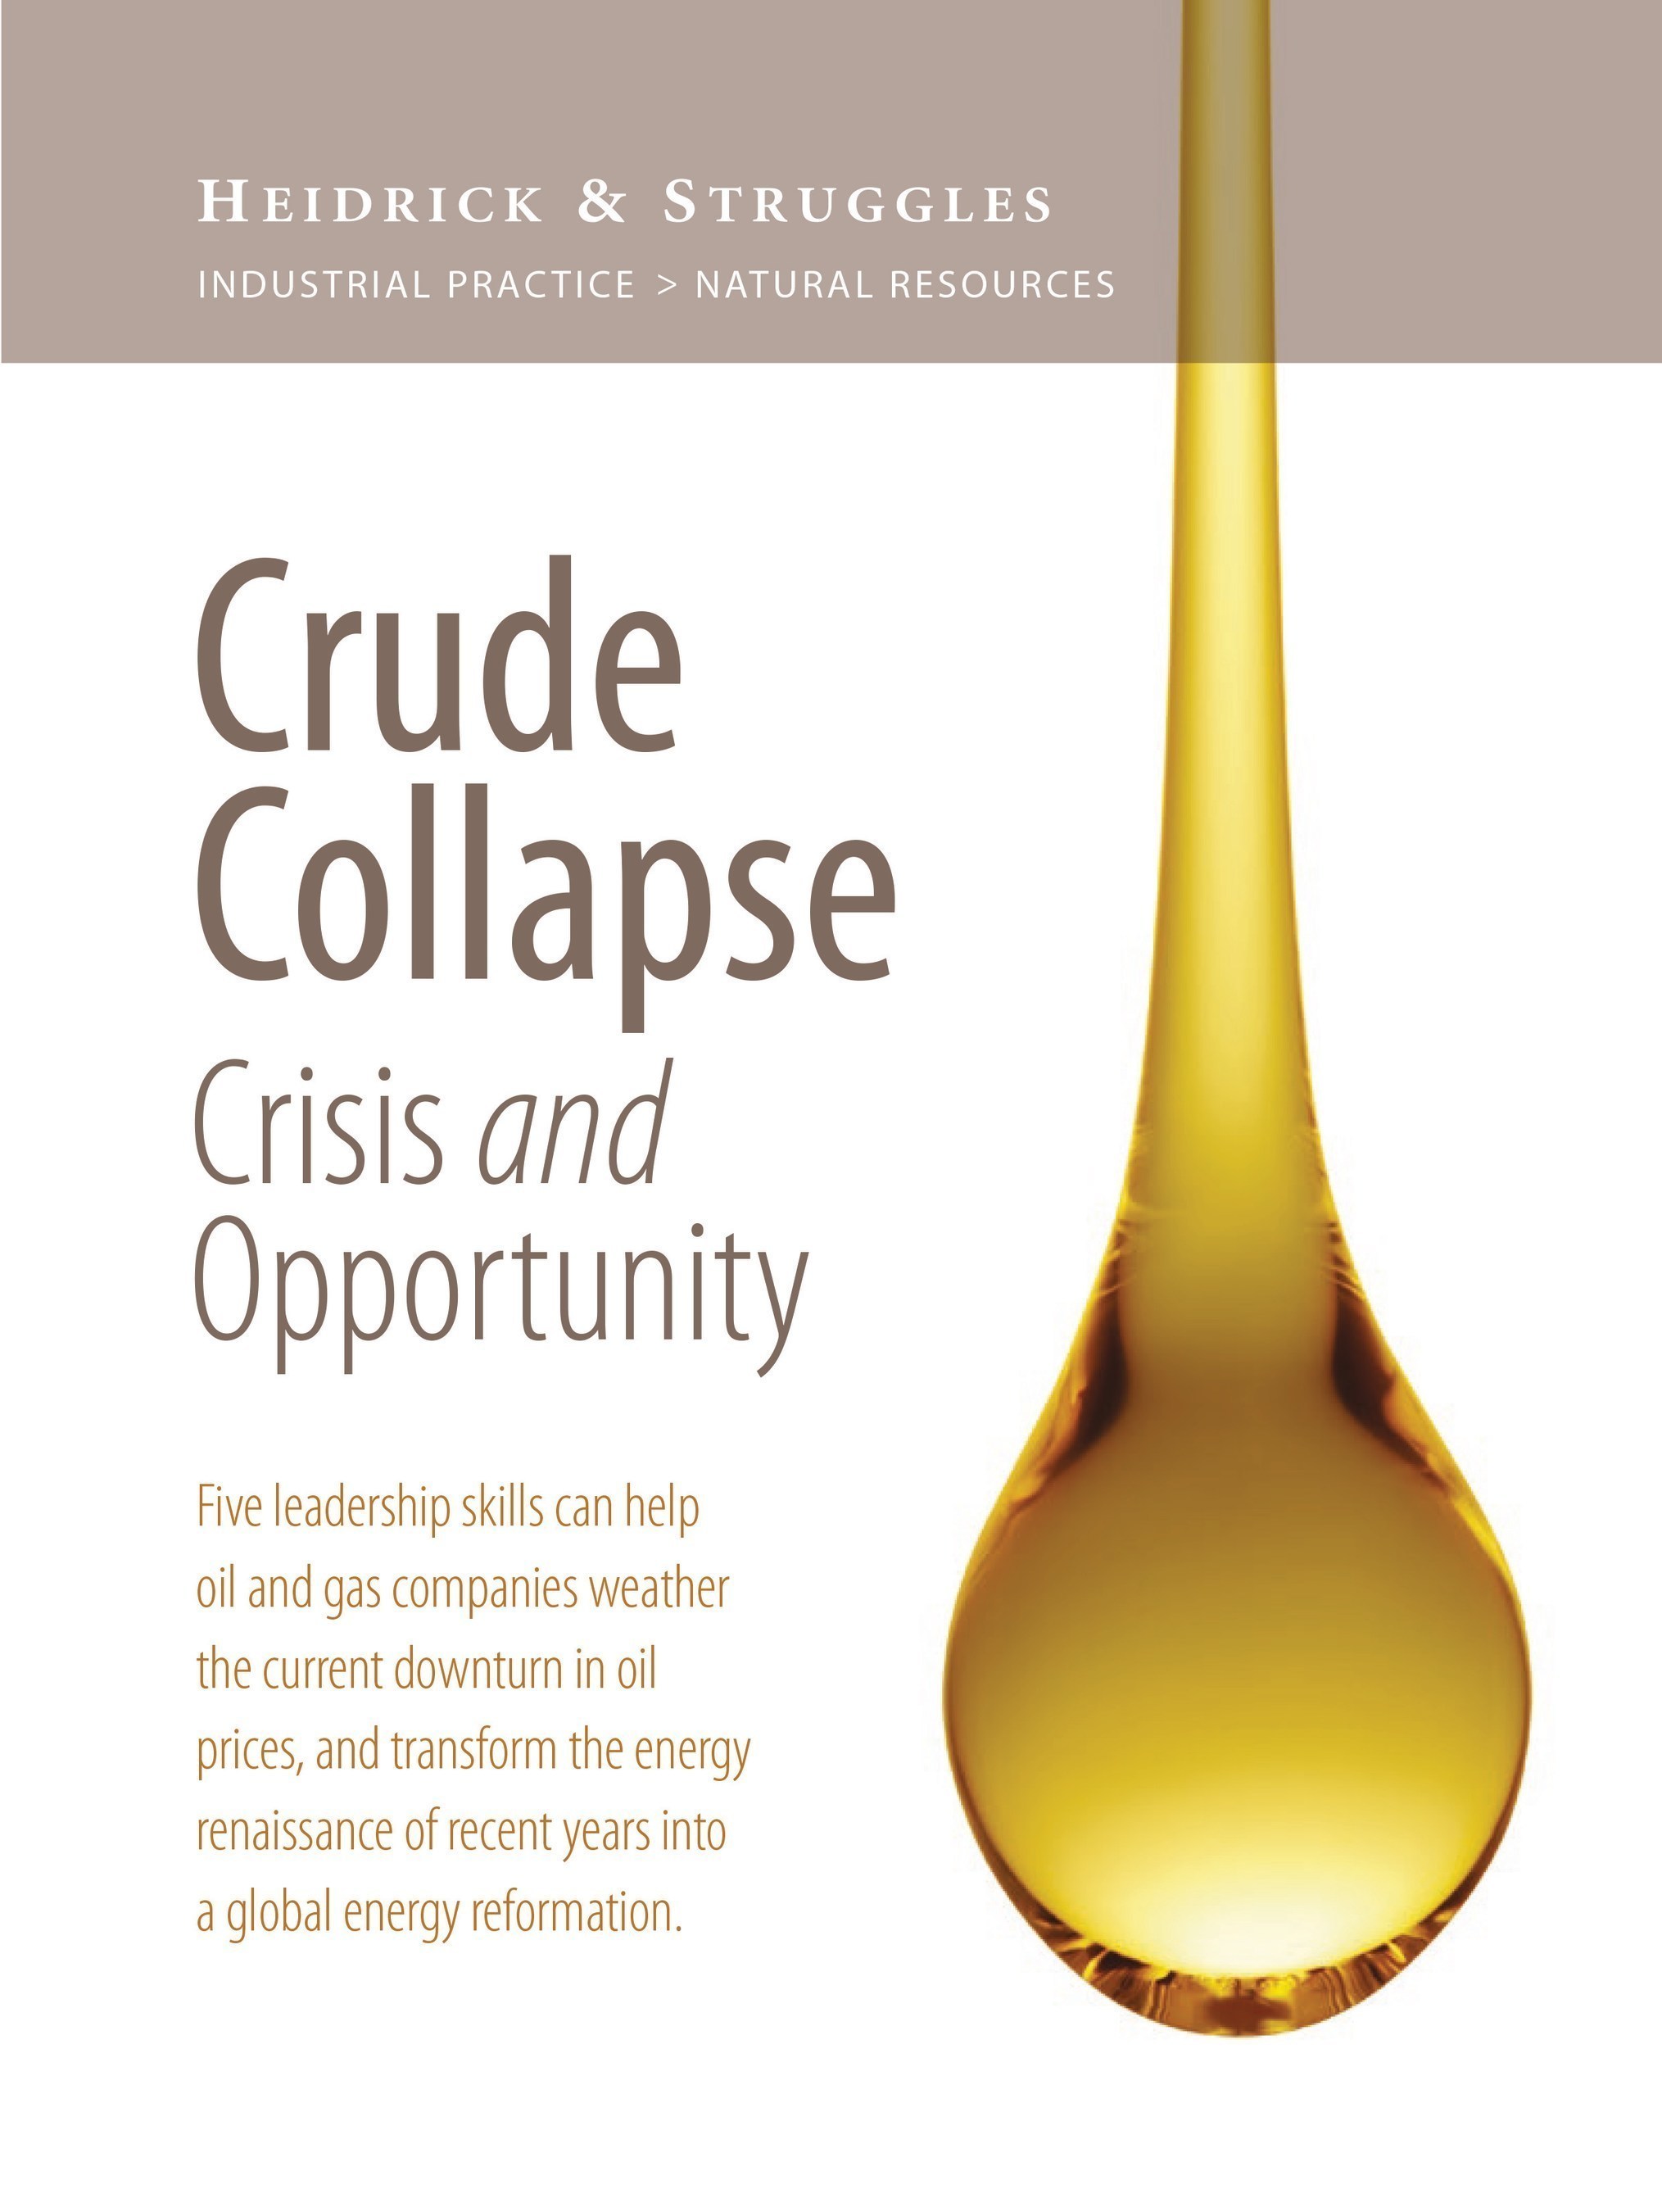 Heidrick & Struggles Thought Leadership - Crude Collapse, Five Leadership Skills that can help oil and gas companies weather the current downturn in oil prices.